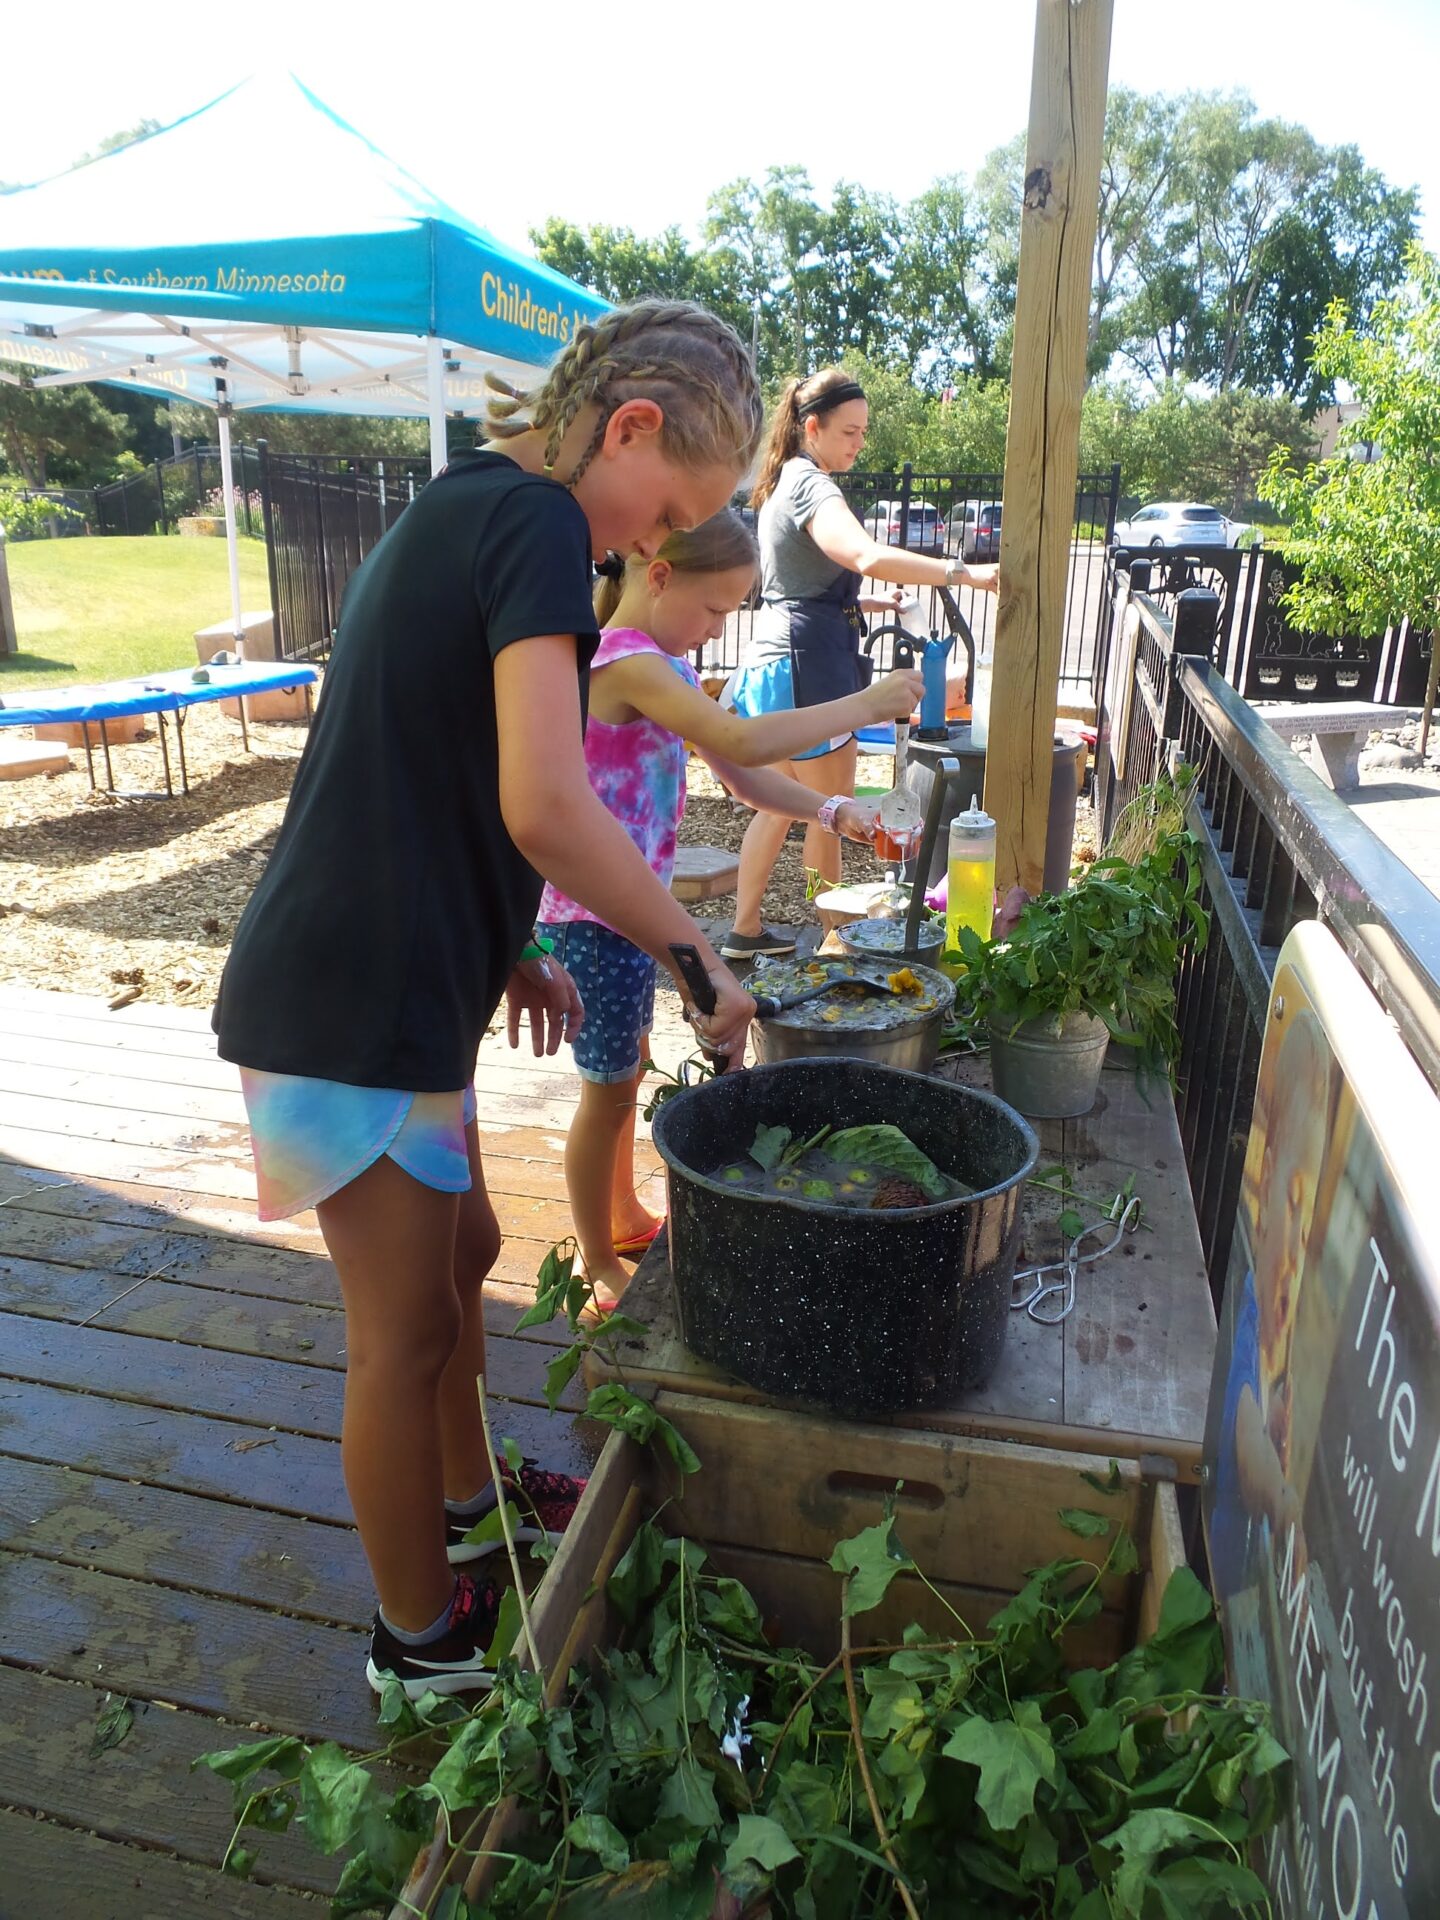 Sensory stimulation nature play in the Mud Kitchen at the Children's Museum Mankato